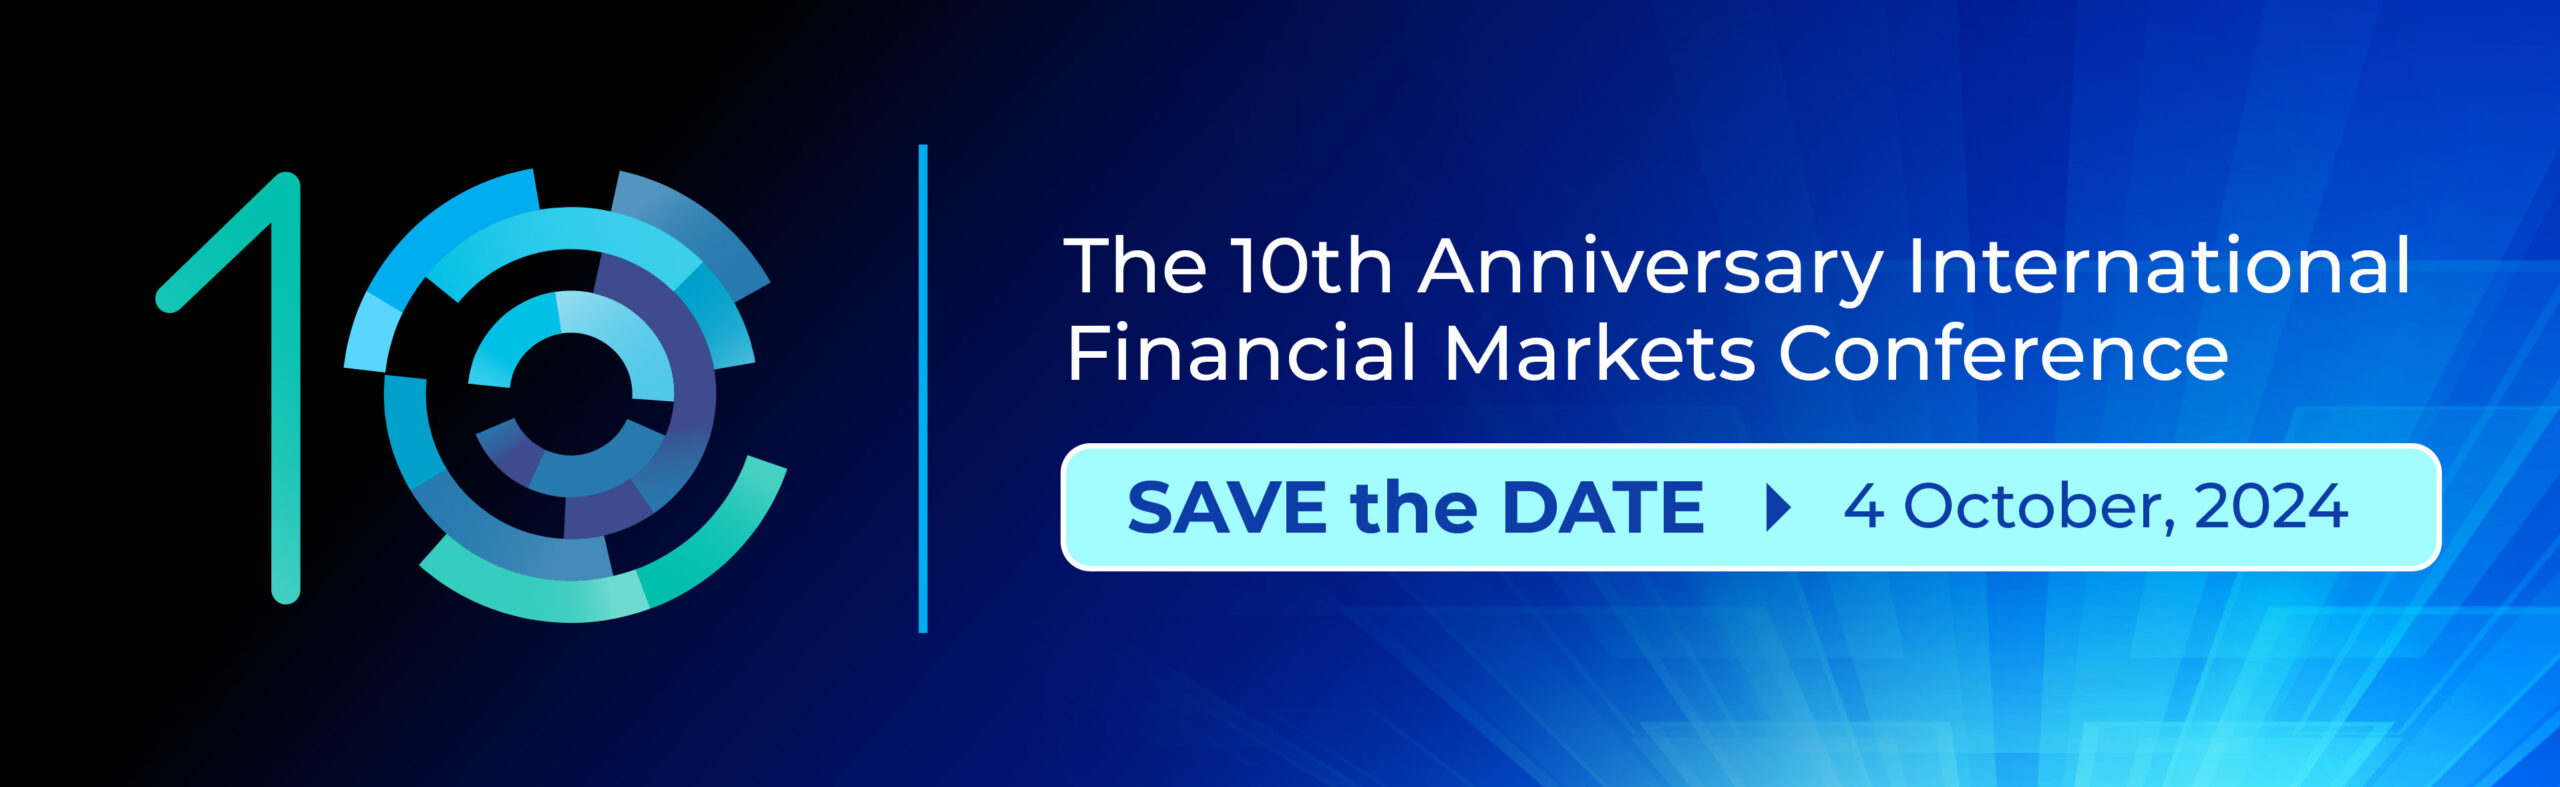 The 10th Anniversary International Financial Markets Conference